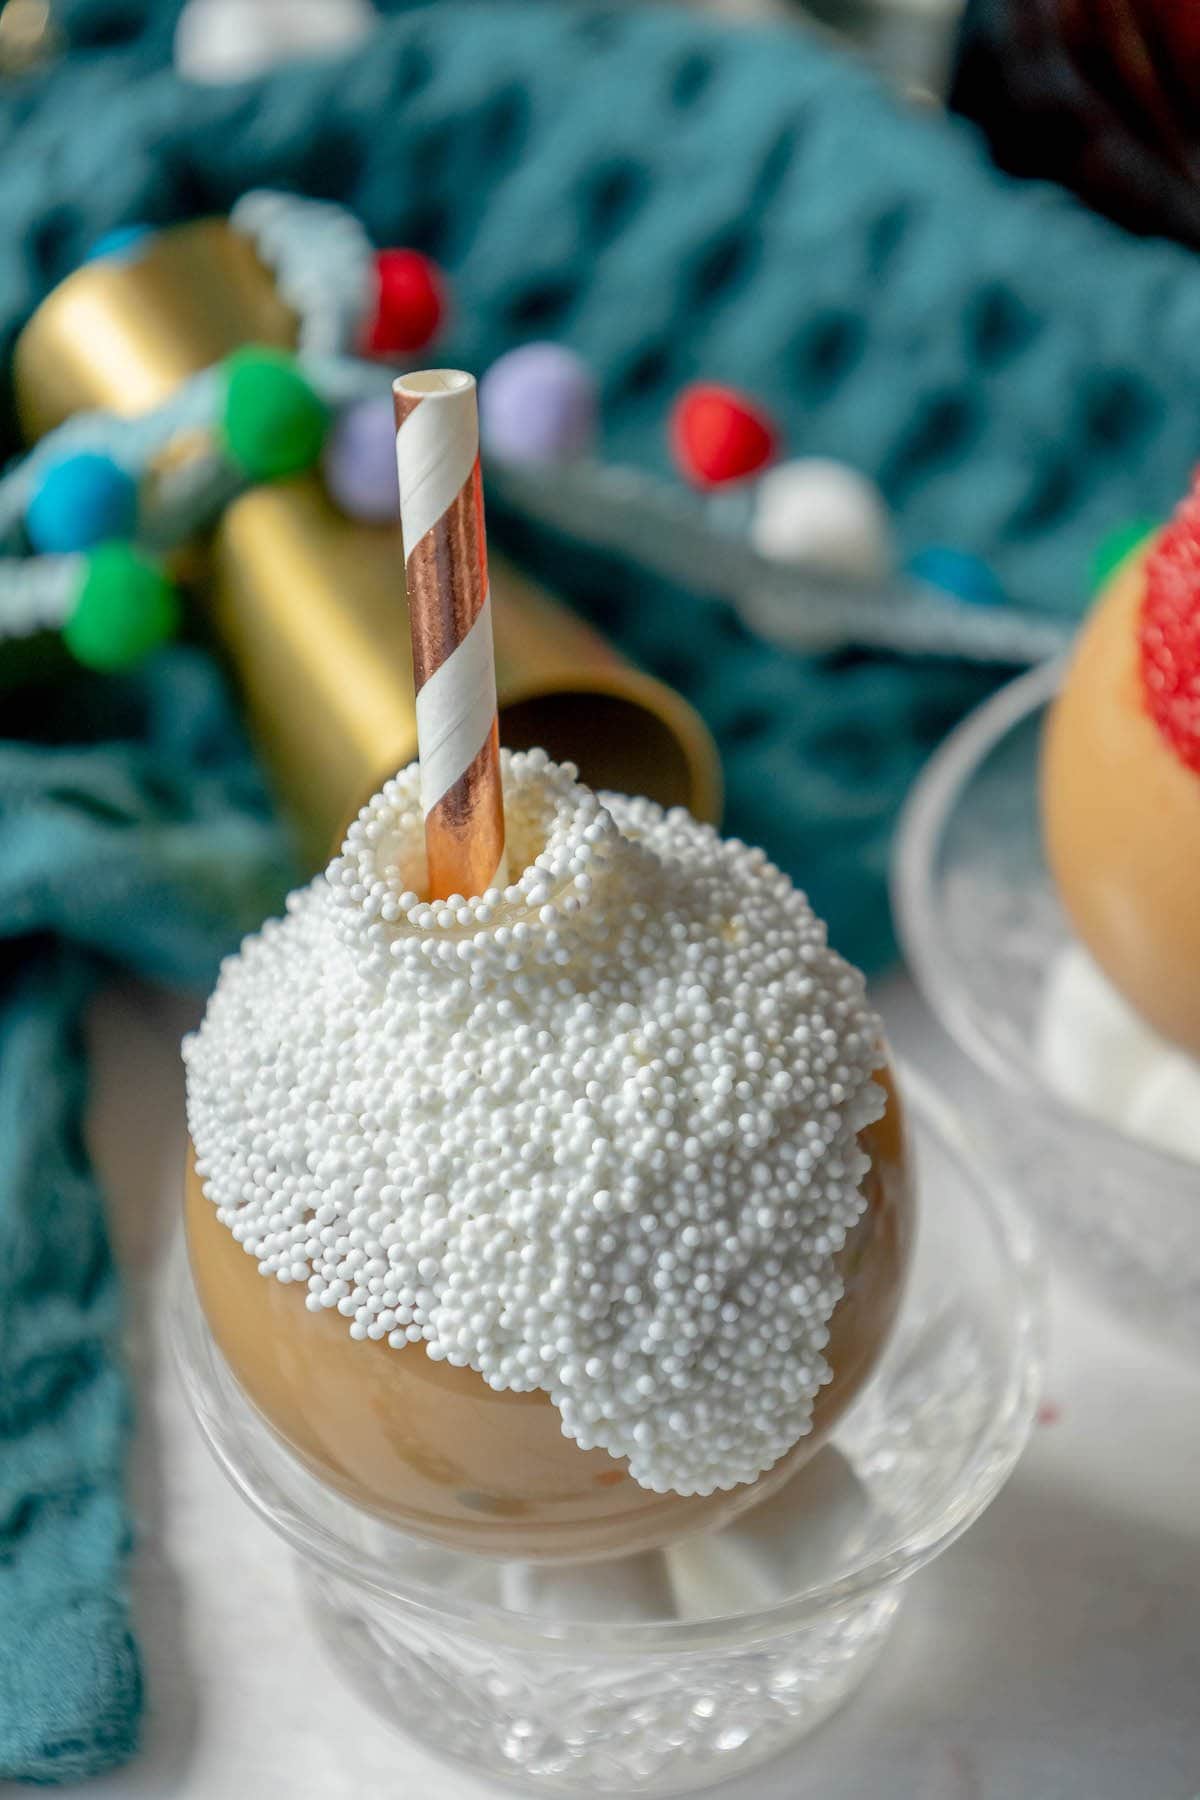 chocolate caramel whiskey cocktail in a plastic ornament with white chocolate and white nonpareil sprinkles and a straw inside in front of christmas decor